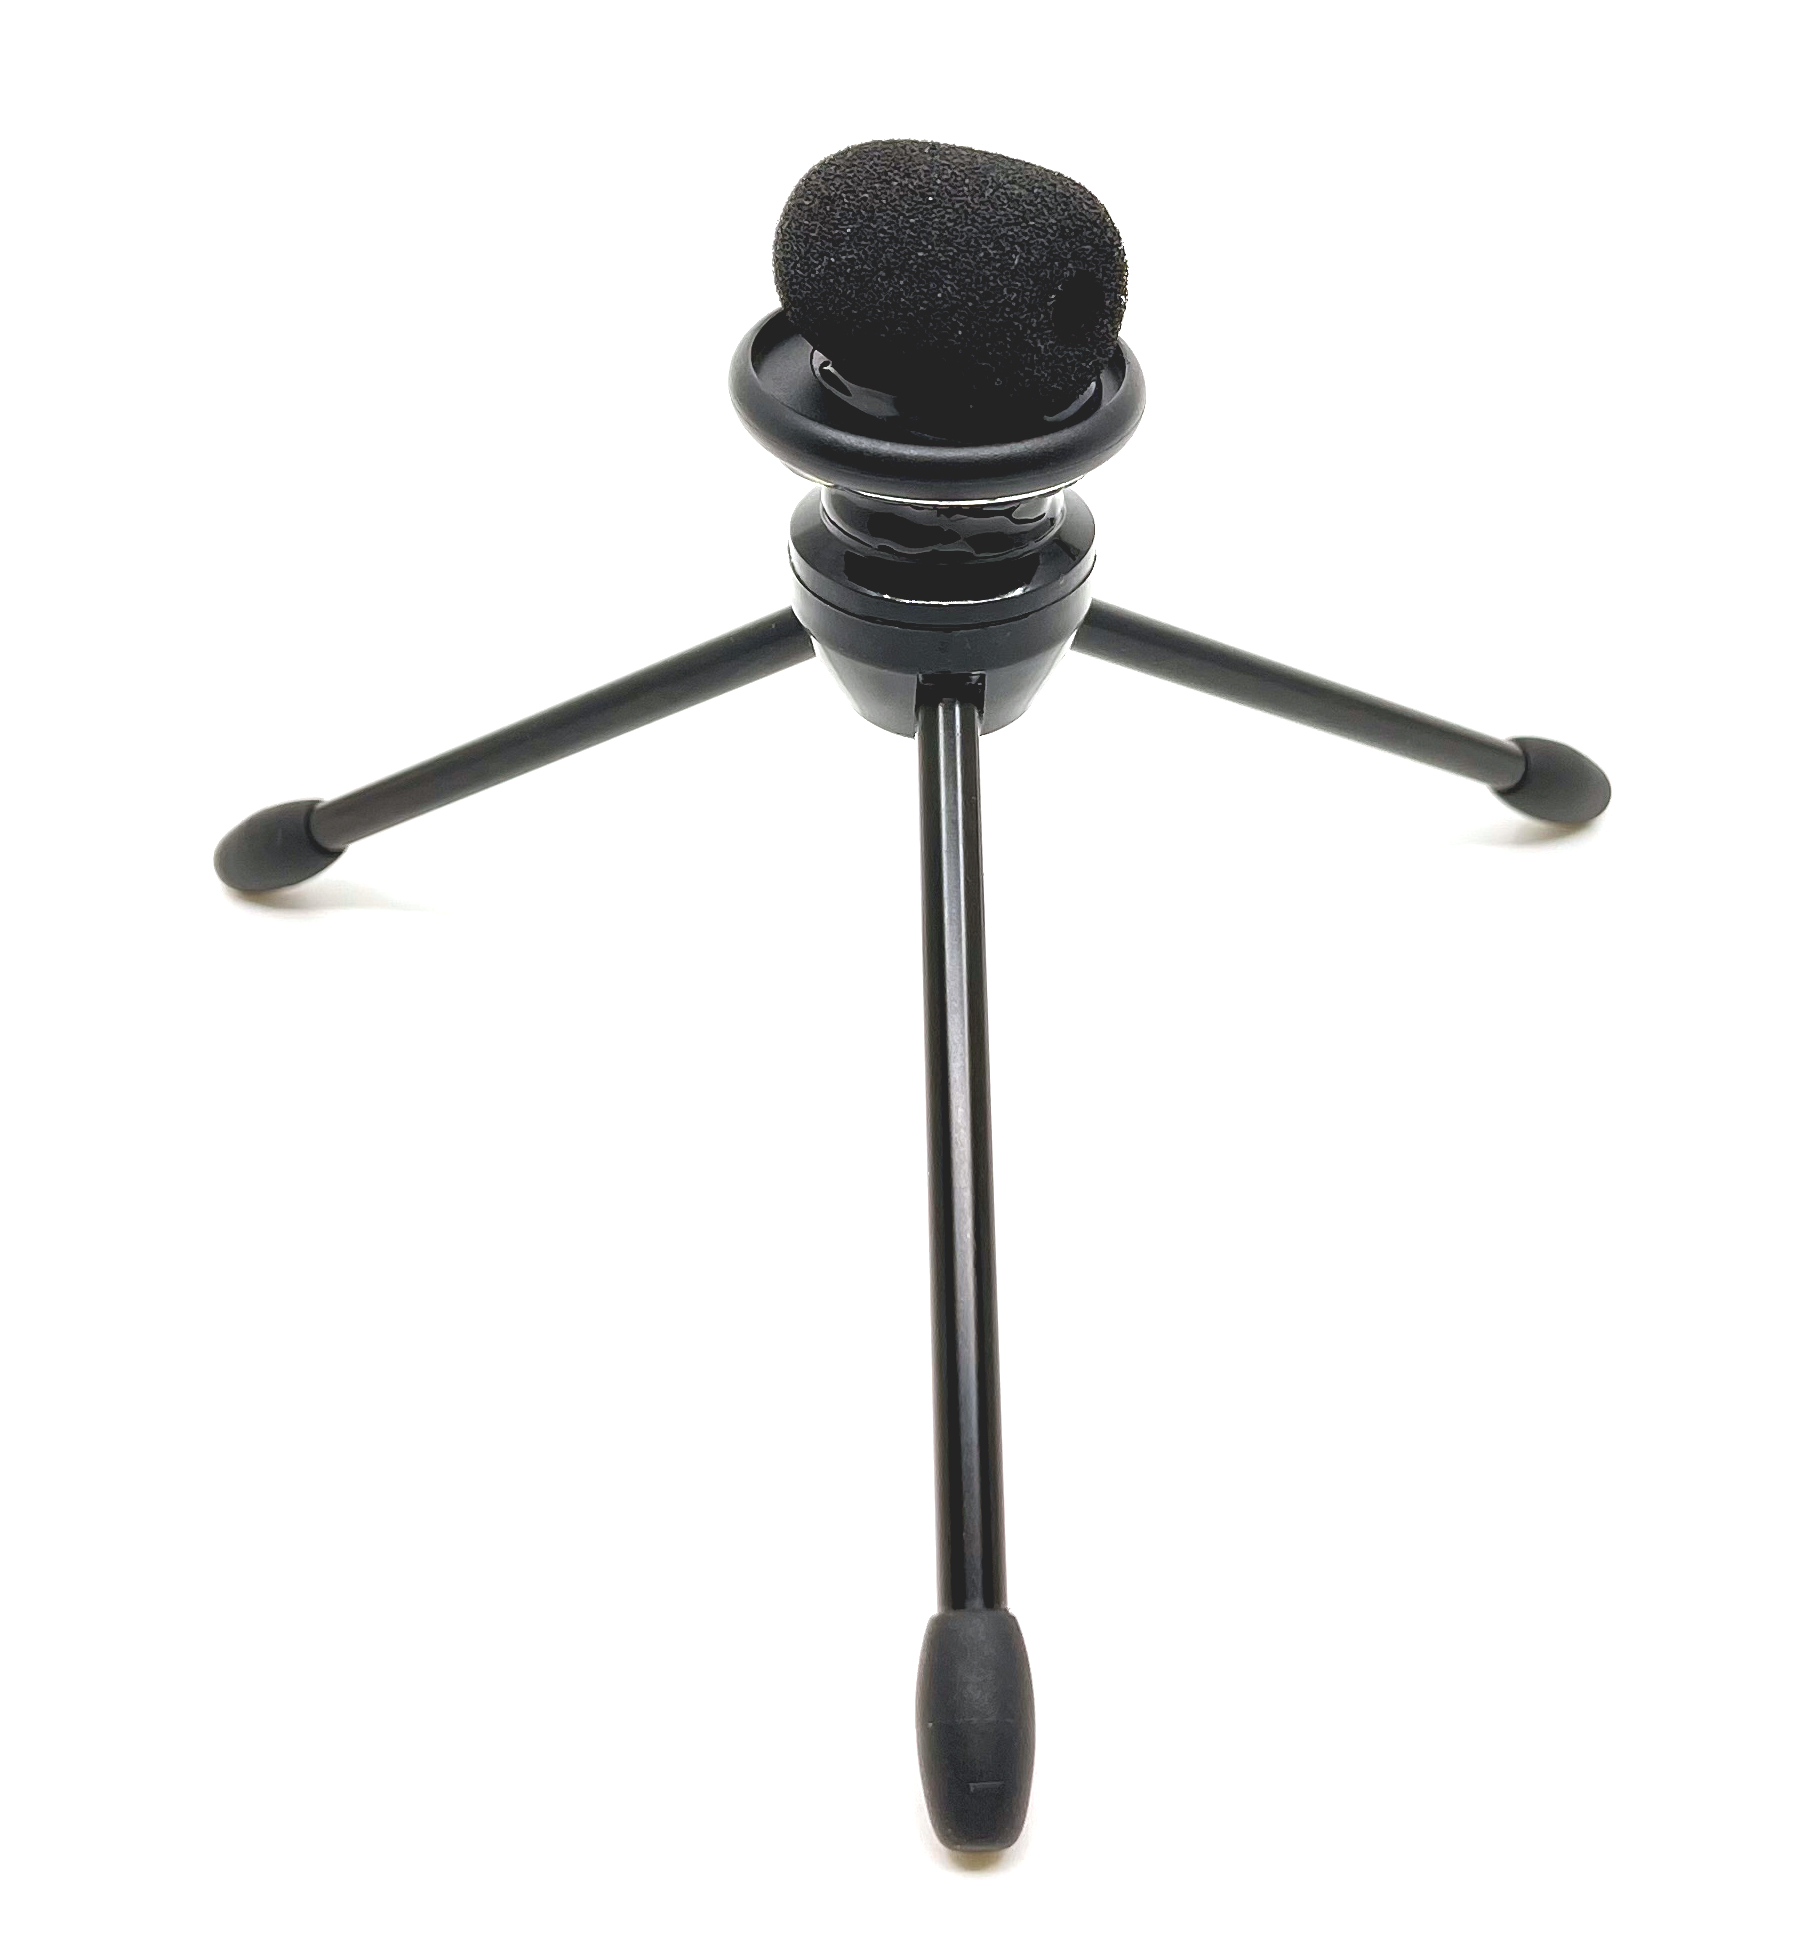 SP-DTS-29 - Desktop tripod with folding legs for lapel microphones Questions & Answers